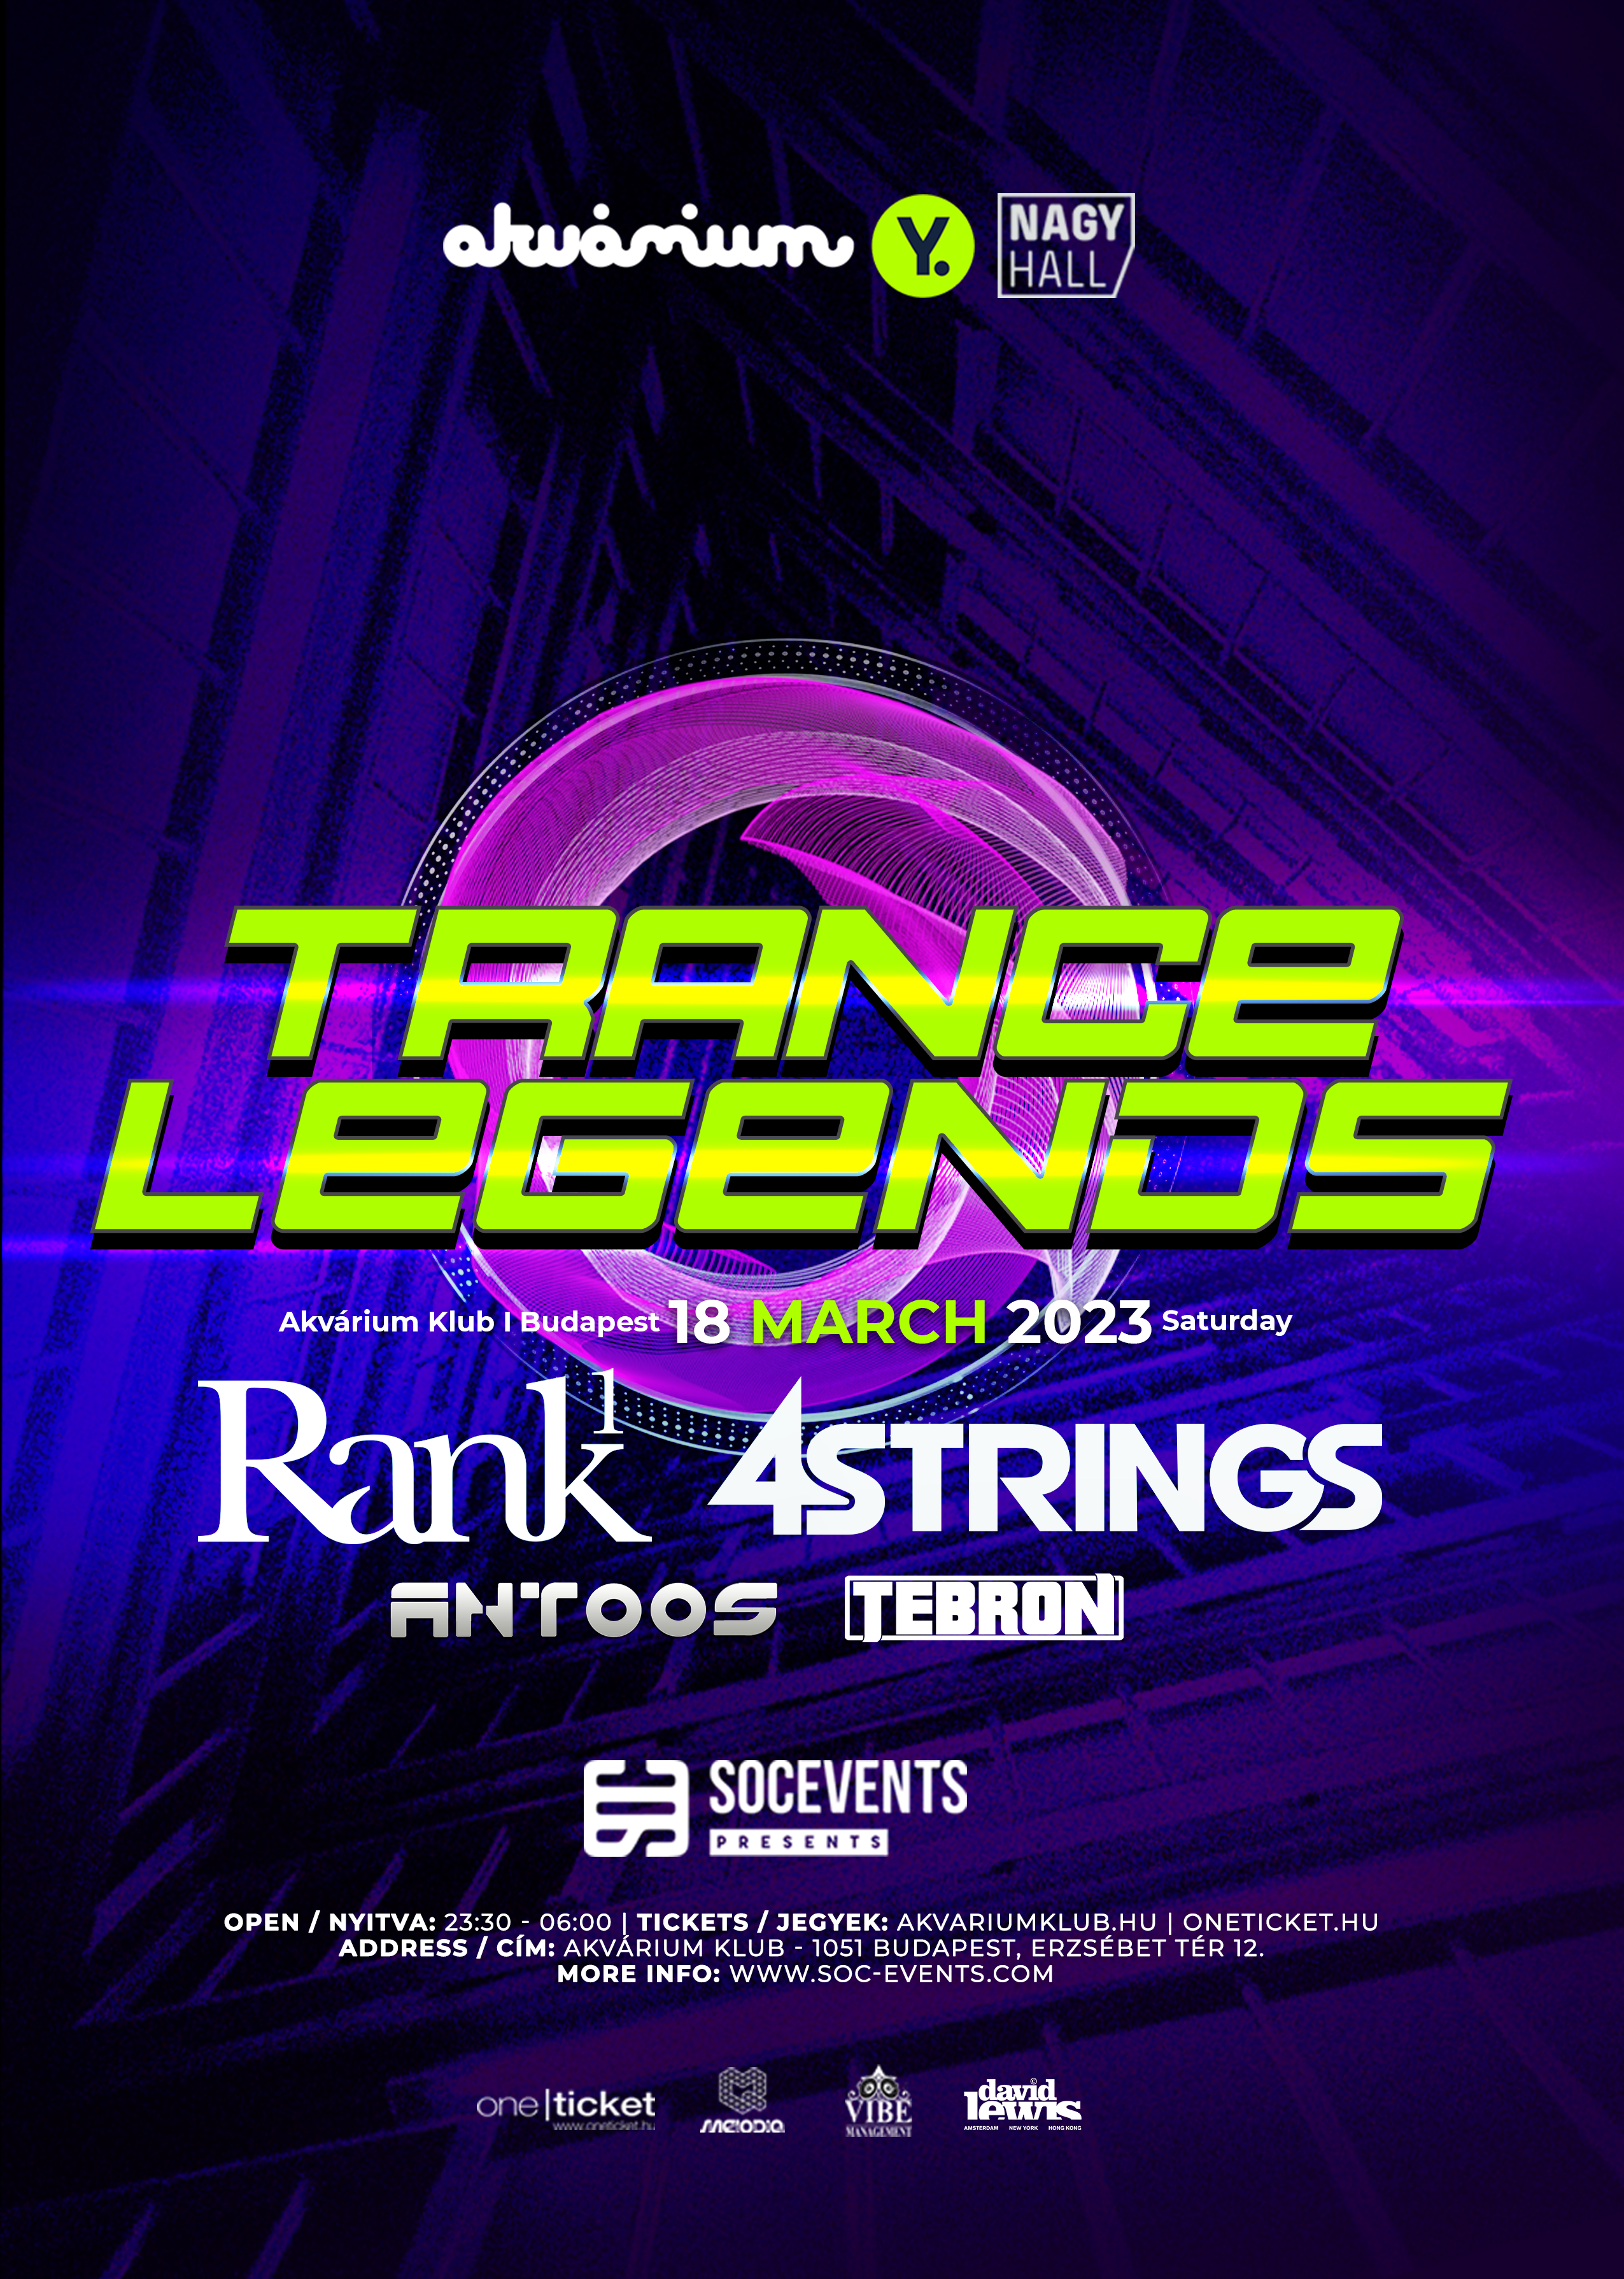 TRANCE LEGENDS Budapest with Rank 1 and 4 STRINGS - Página frontal